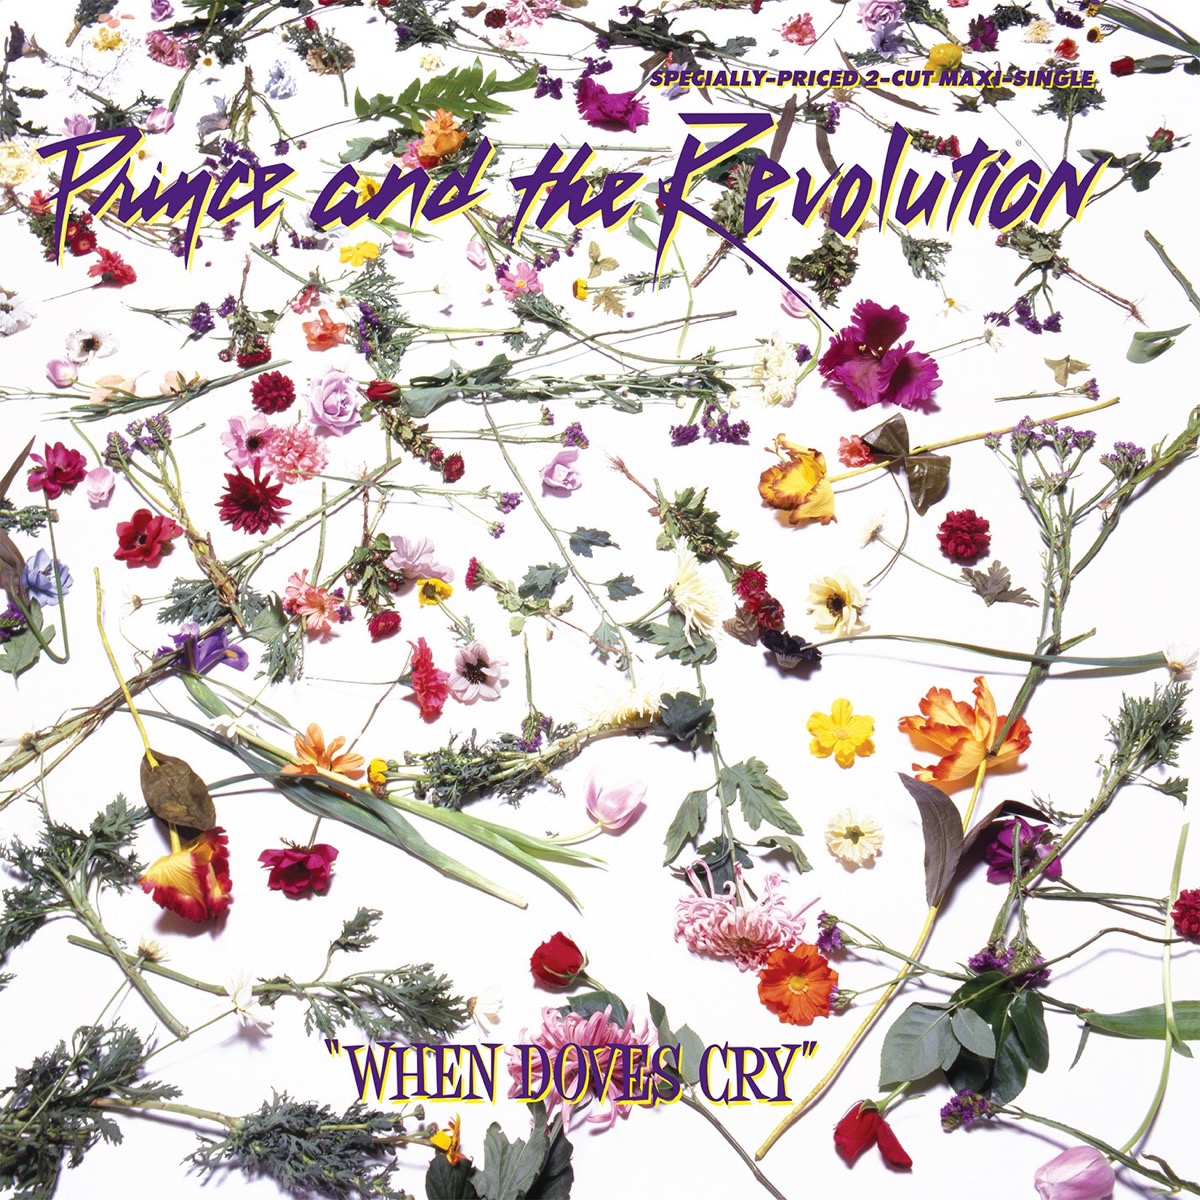 Prince and the Revolution "When Doves Cry" singles cover